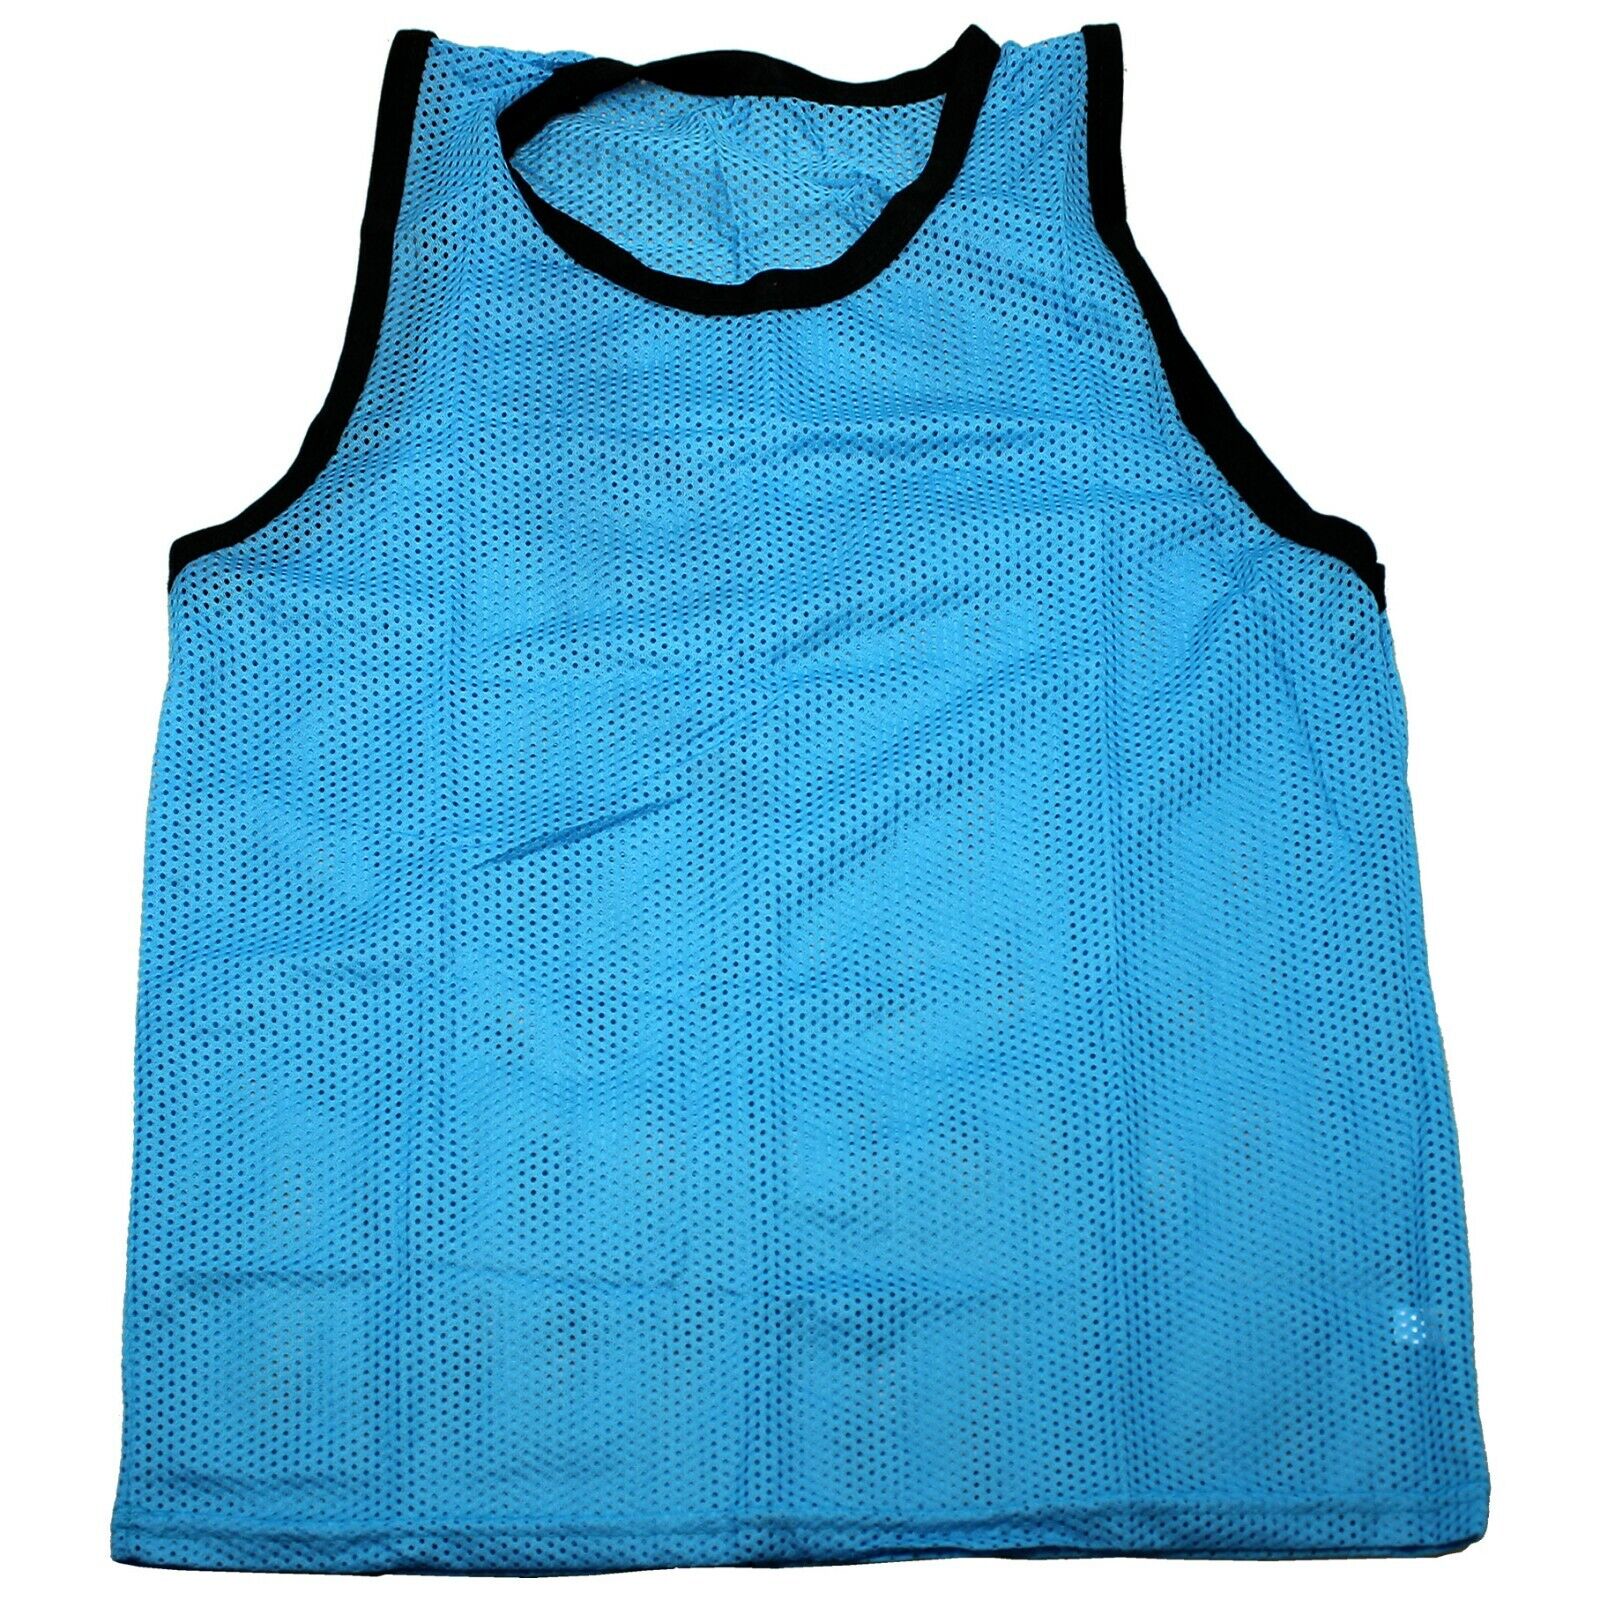 Great Choice Products 12 Girls Light Blue Scrimmage Vests Training Pinnies Soccer Softball Youth New!